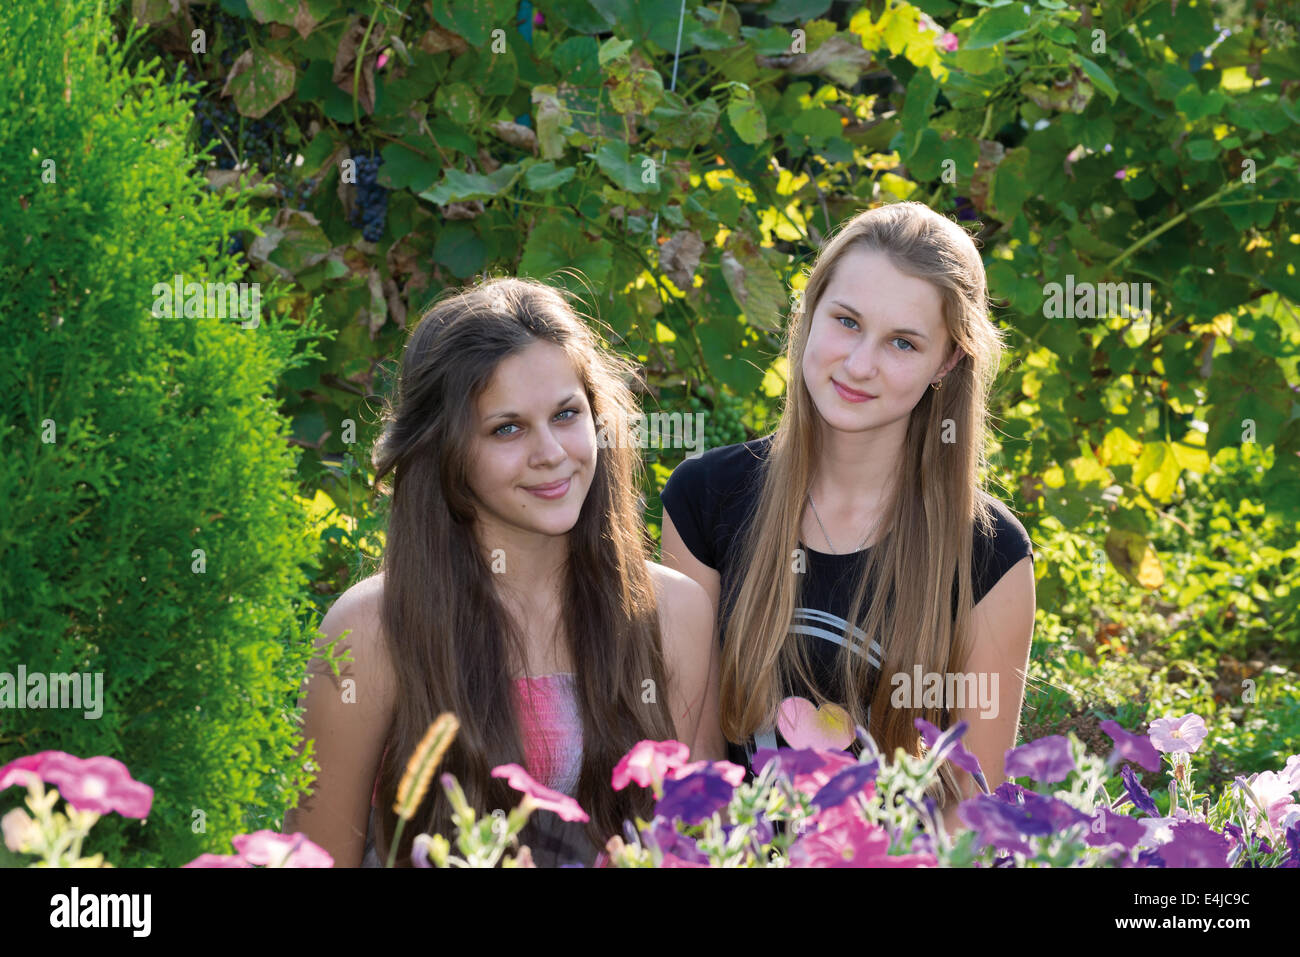 Teen girls on a background of flowers Stock Photo